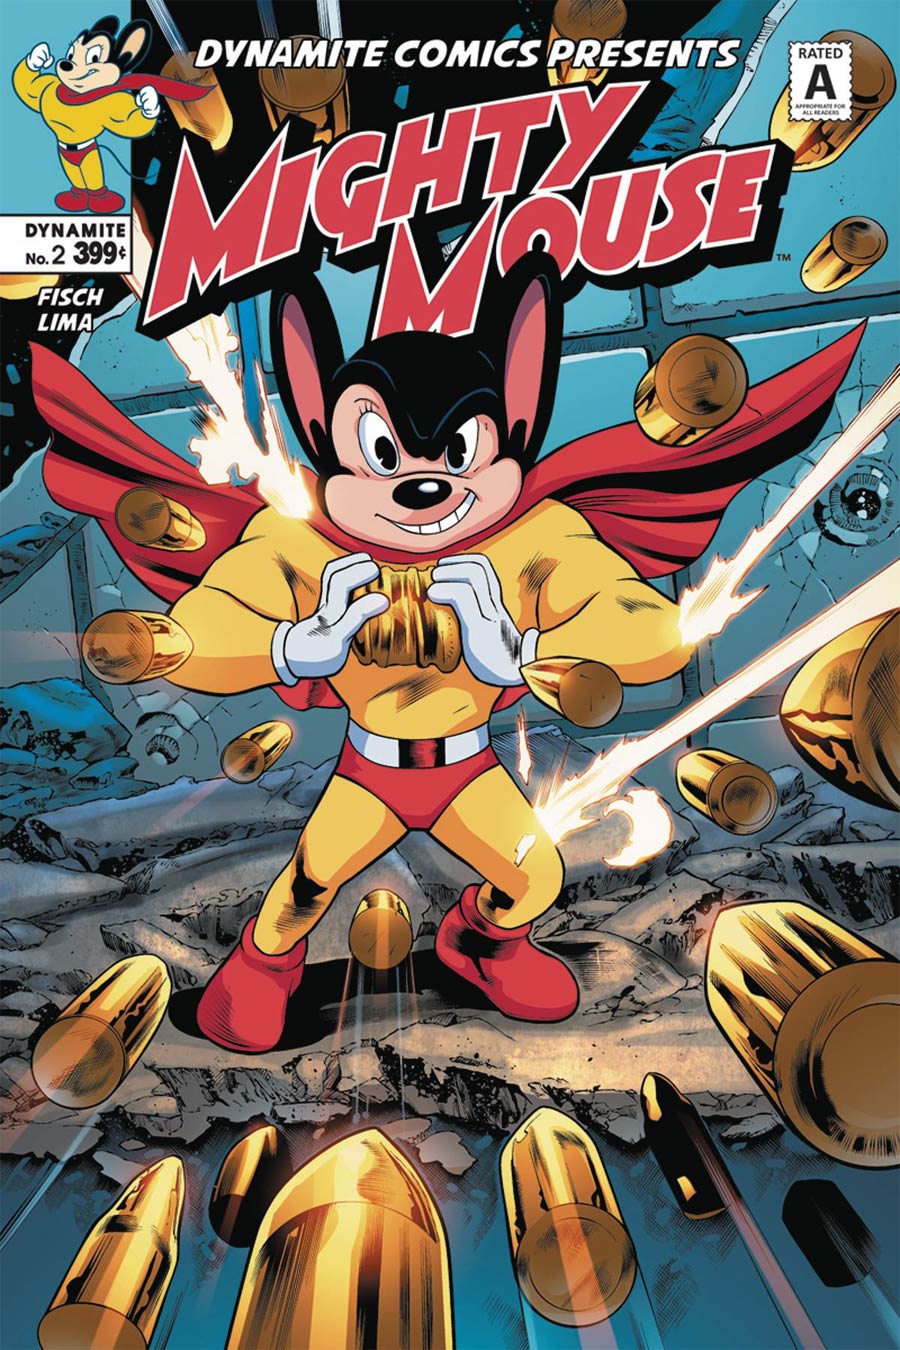 Mighty Mouse Vol 5 #2 Cover B Variant Igor Lima Cover